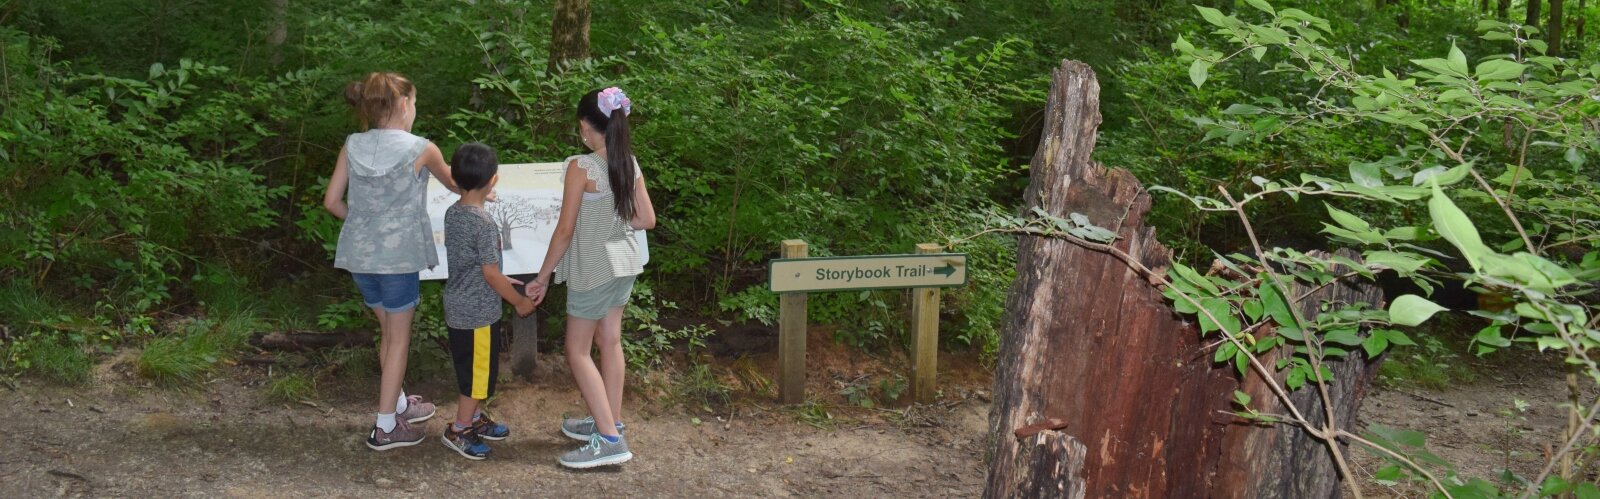 Exploring the new Storybook Trail at John Bryan State Park in Yellow Springs can be a fun experience for families.